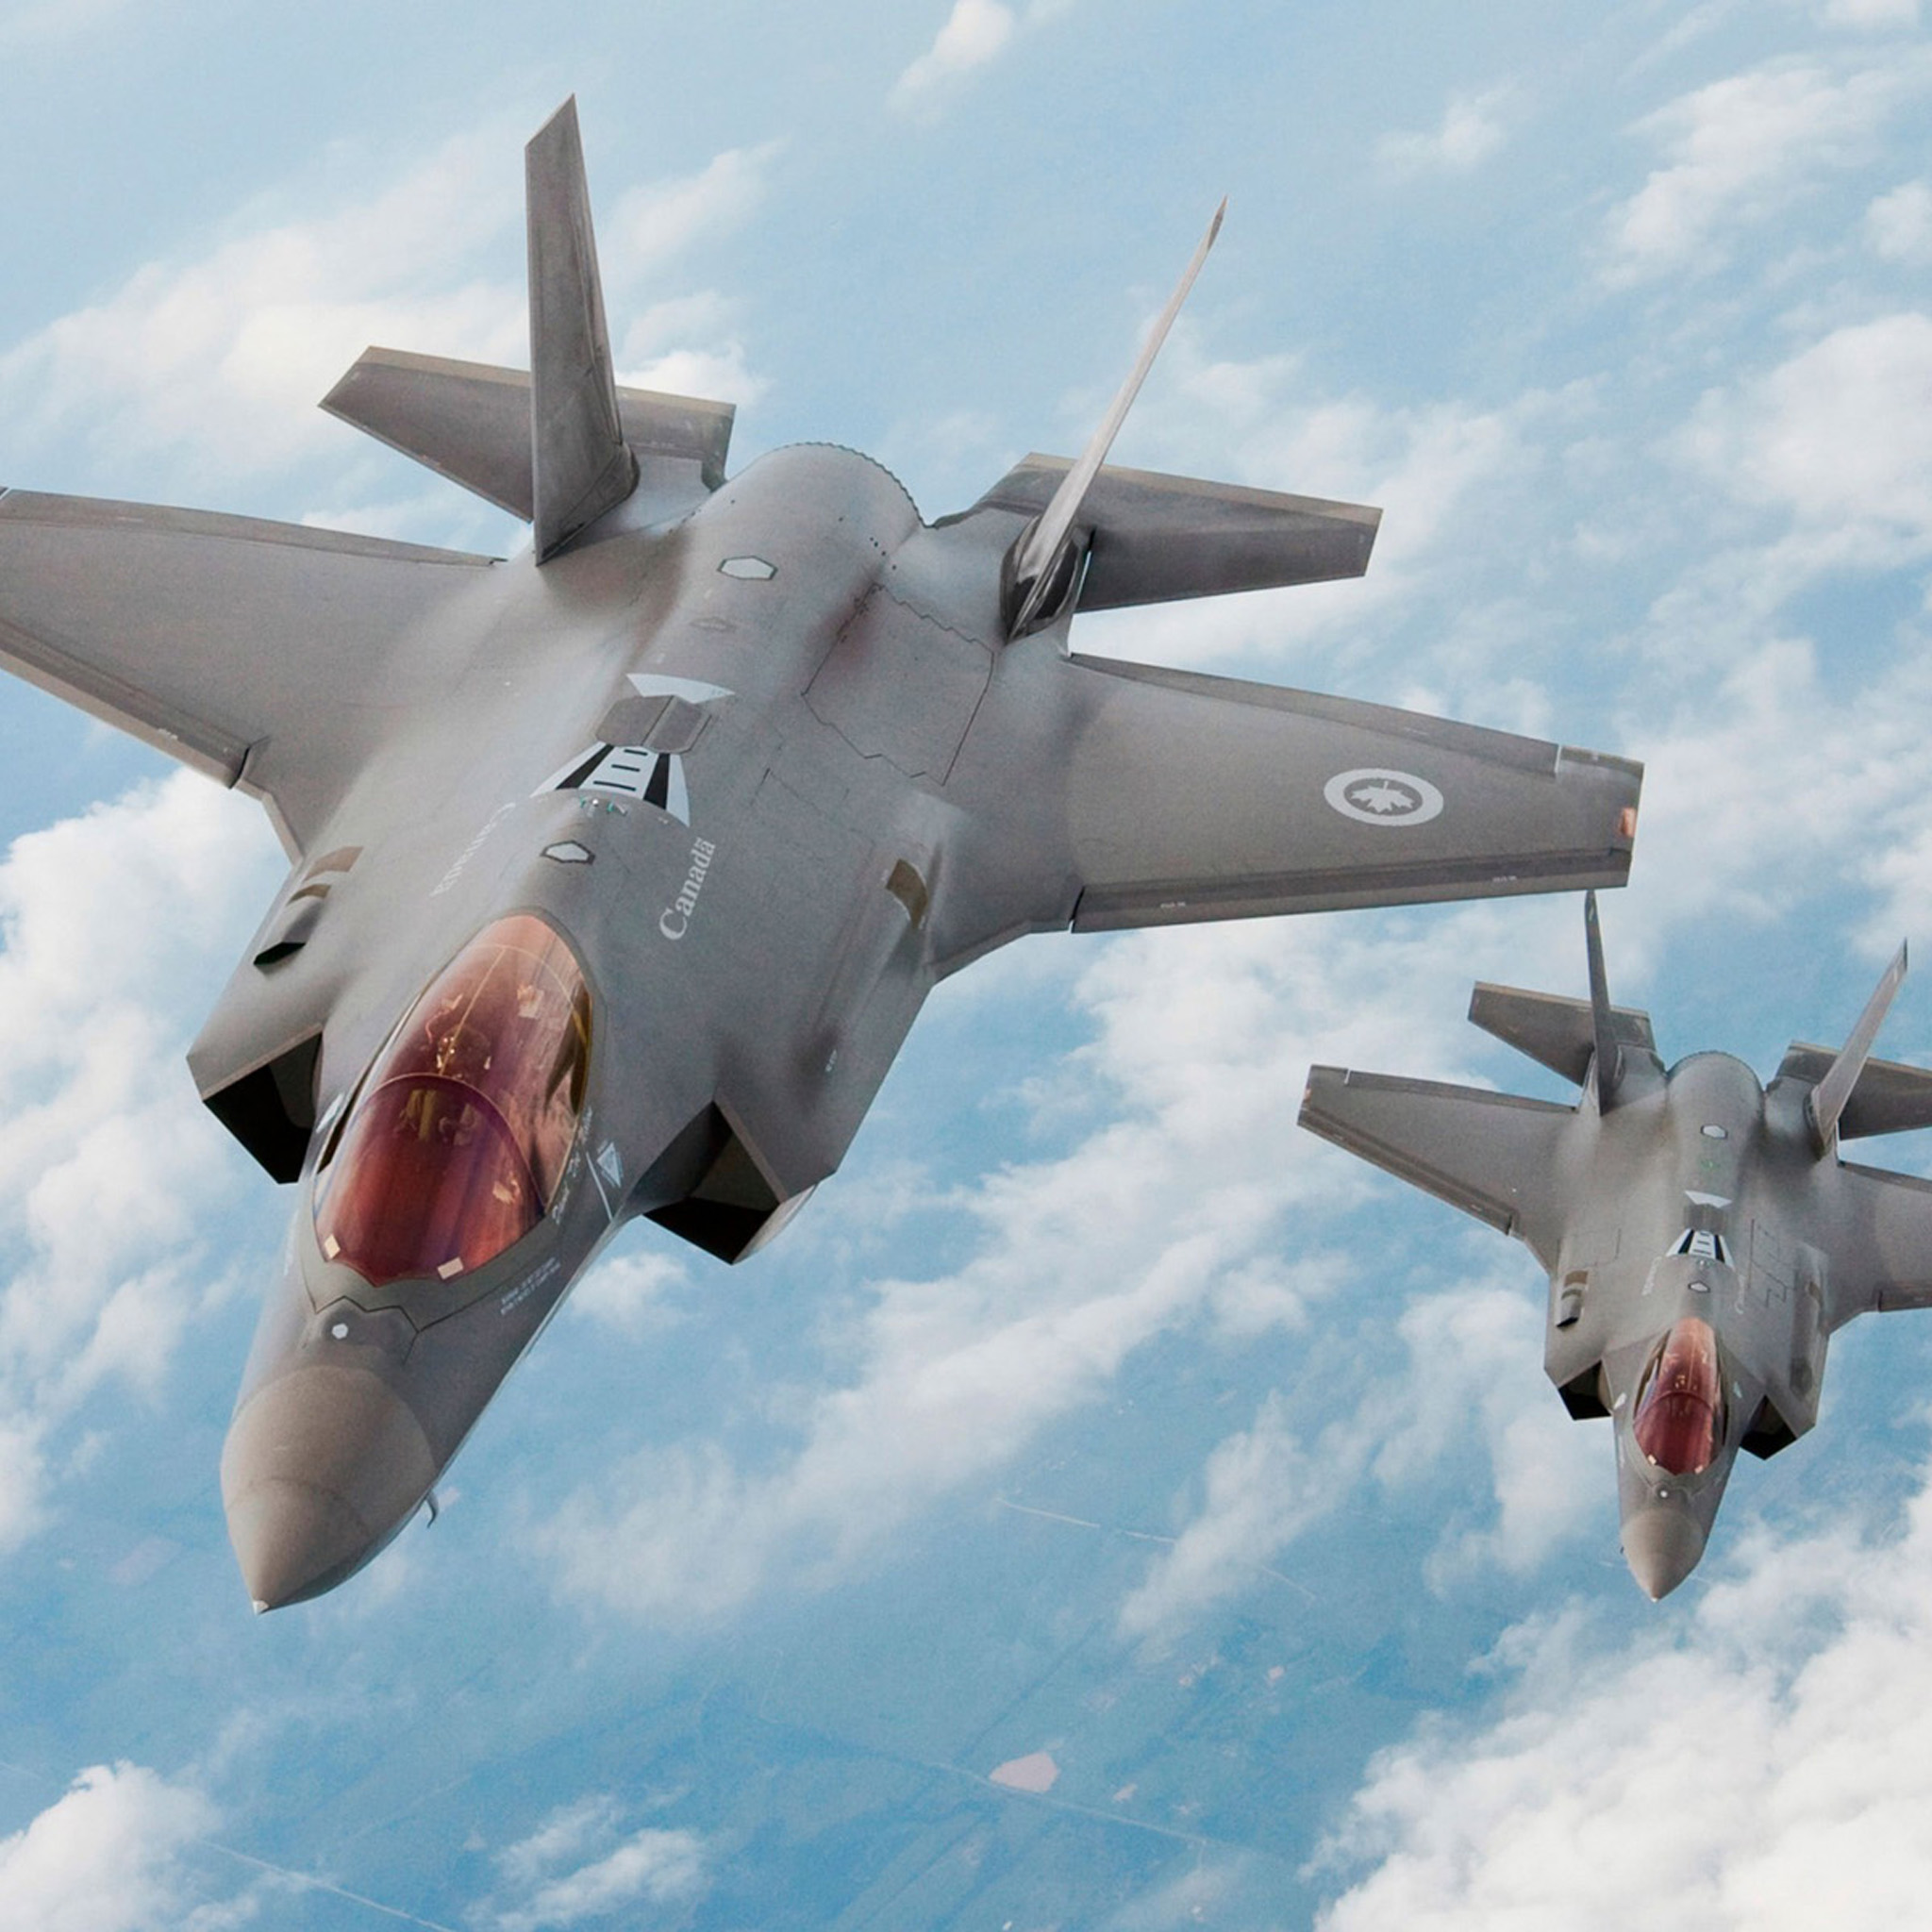 F-35 Strike Fighter iPad Air 2 Wallpapers | iPad Air 2 Wallpapers